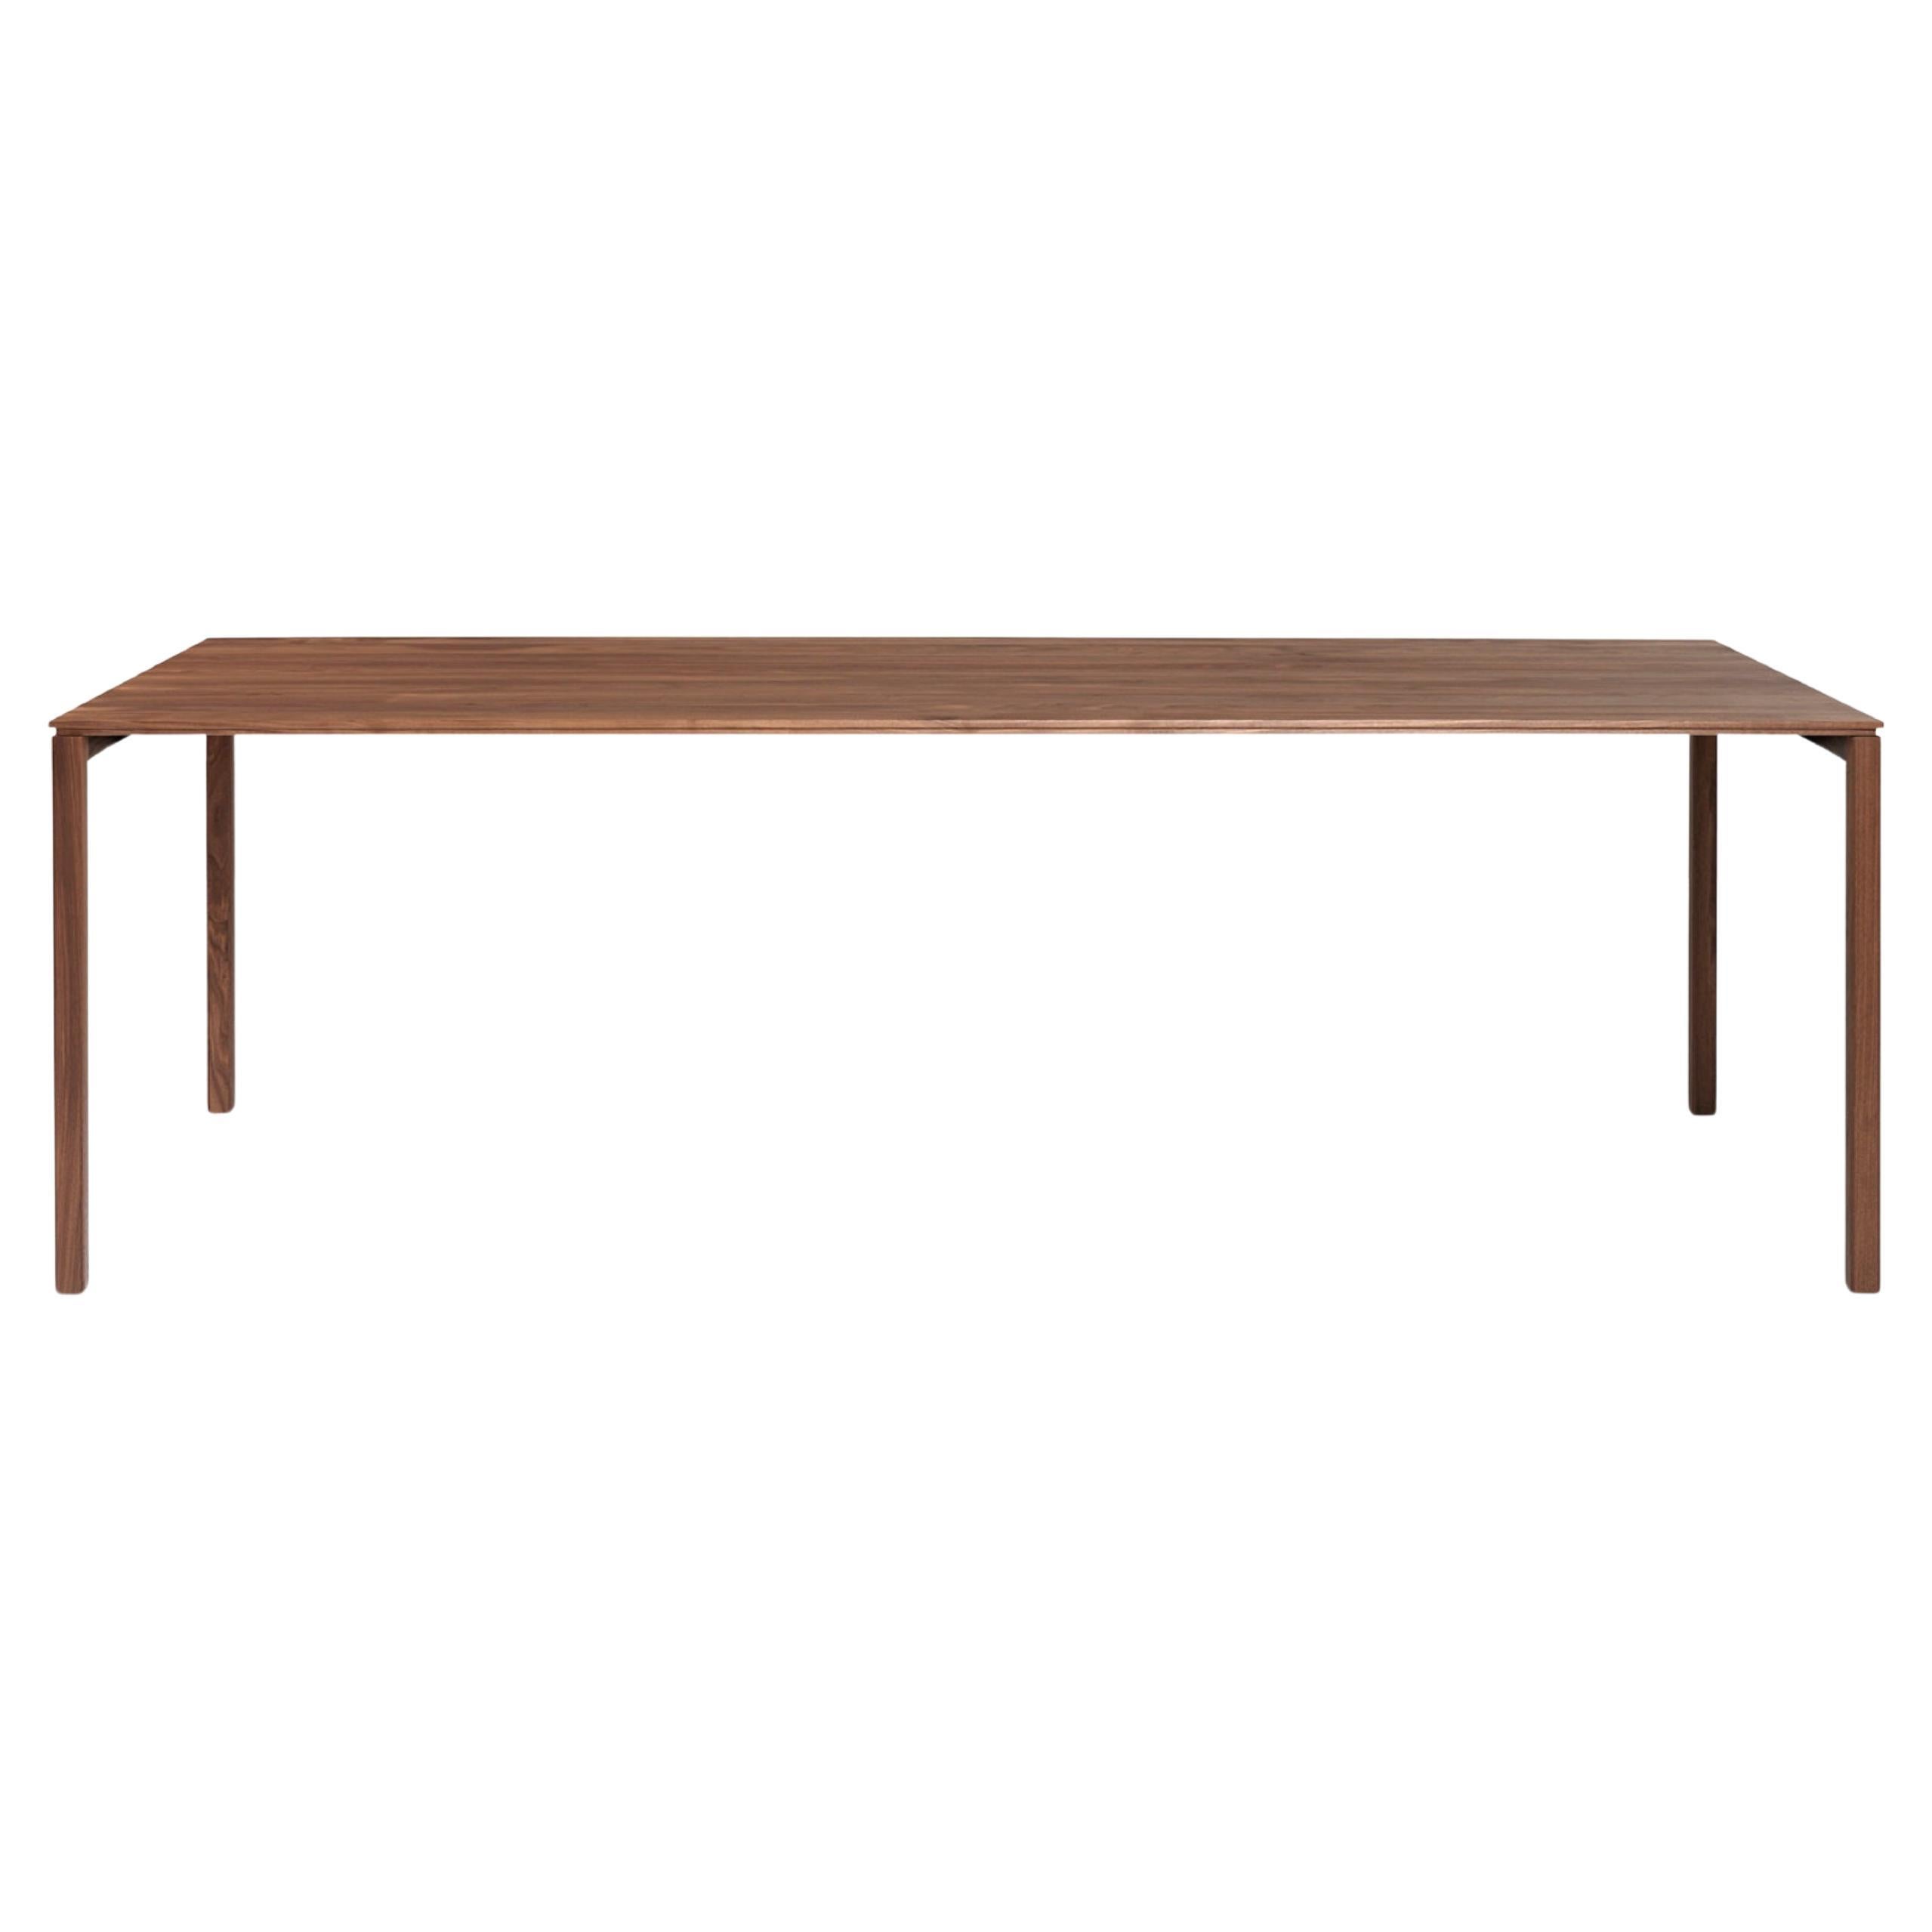 Kluskens Mistral Dining Table For Sale